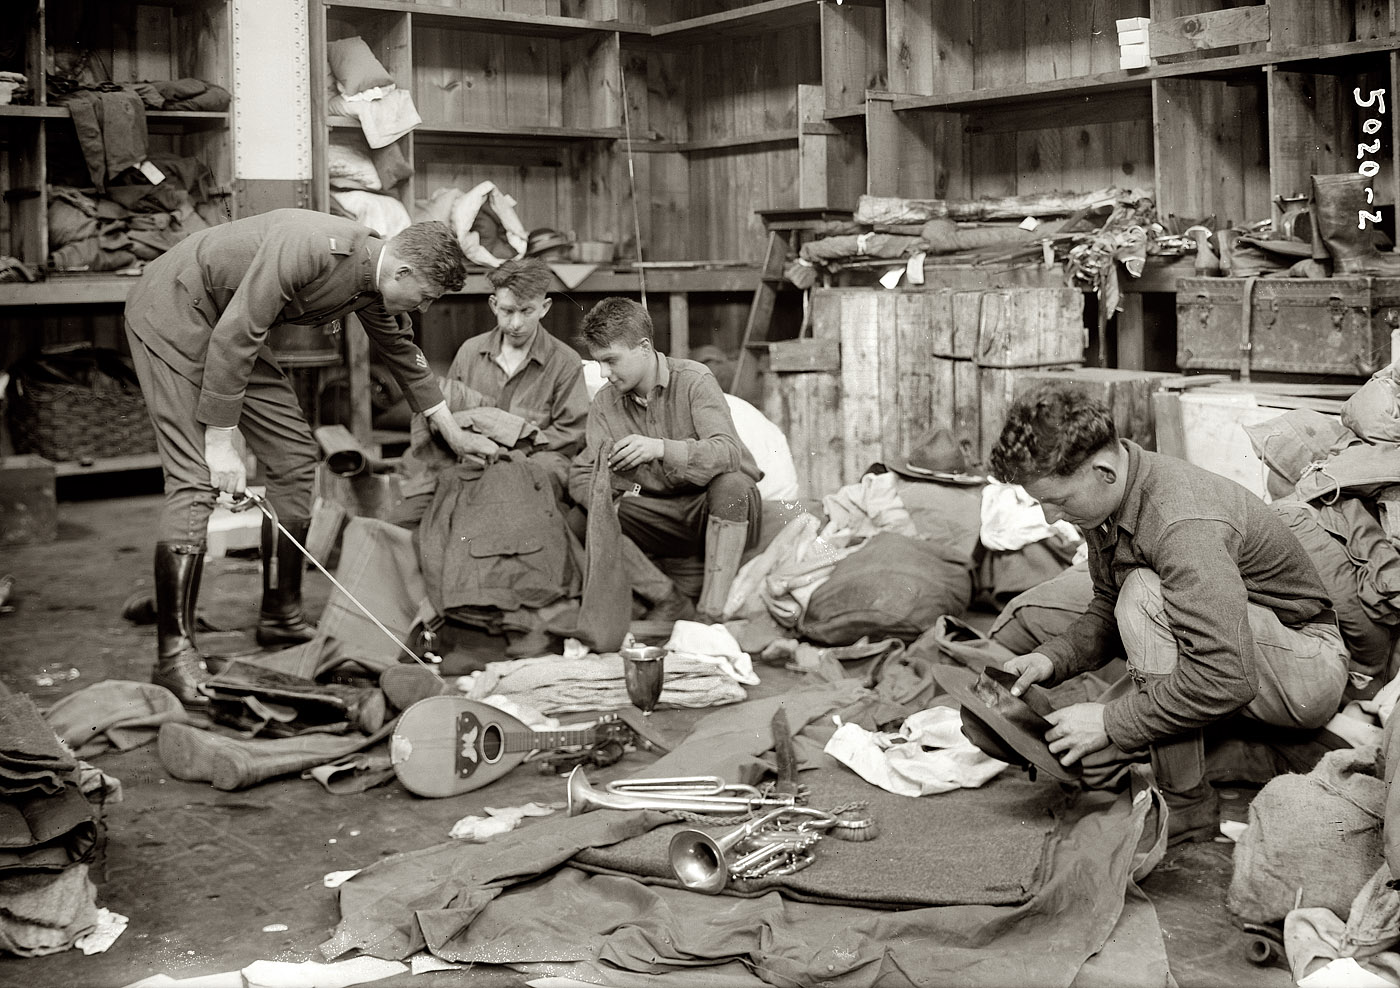 "Tracing lost property of soldiers," circa 1919. View full size. The soldiers seem to be a musical bunch. 5x7 glass negative, George Grantham Bain Collection.